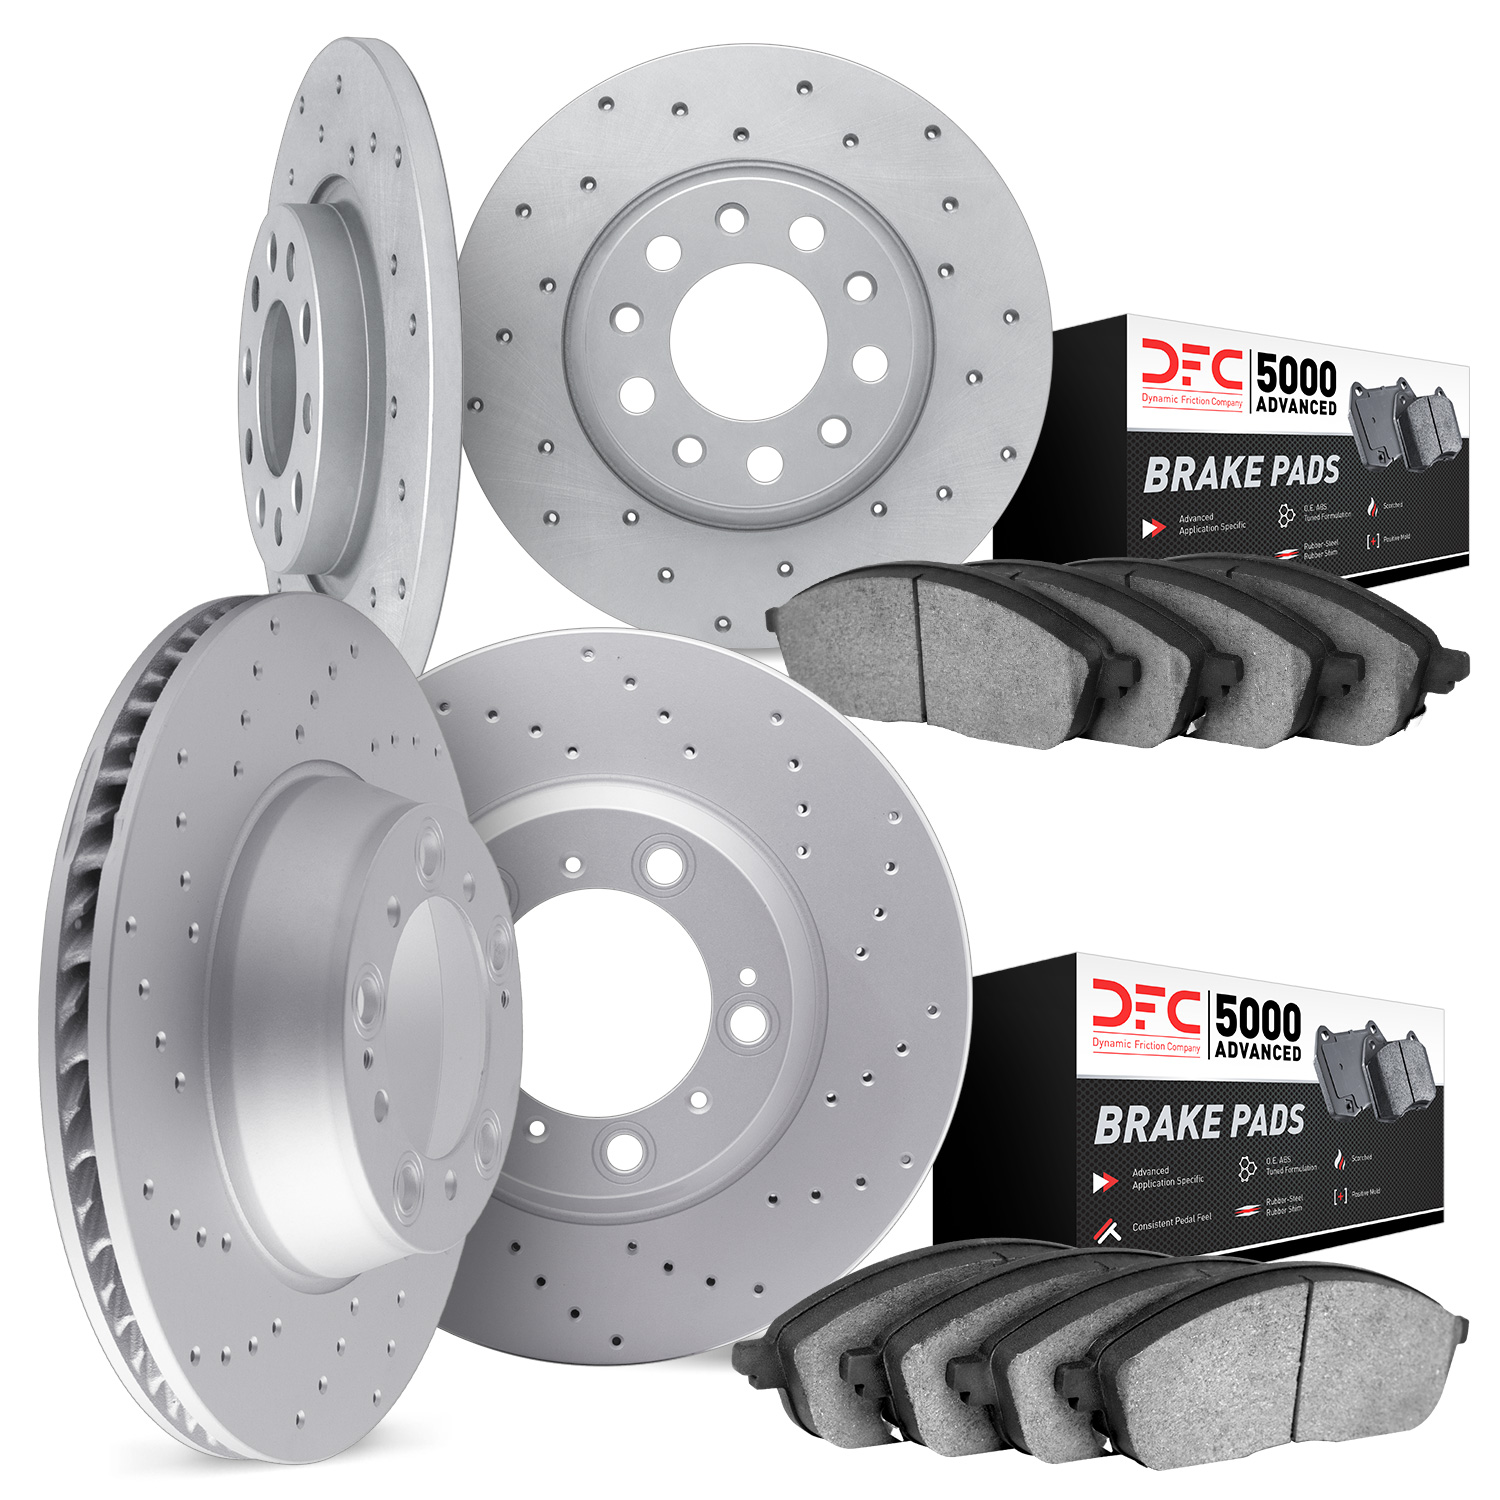 2704-67021 Geoperformance Drilled Brake Rotors with Active Performance Pads Kit, 2013-2019 Infiniti/Nissan, Position: Front and